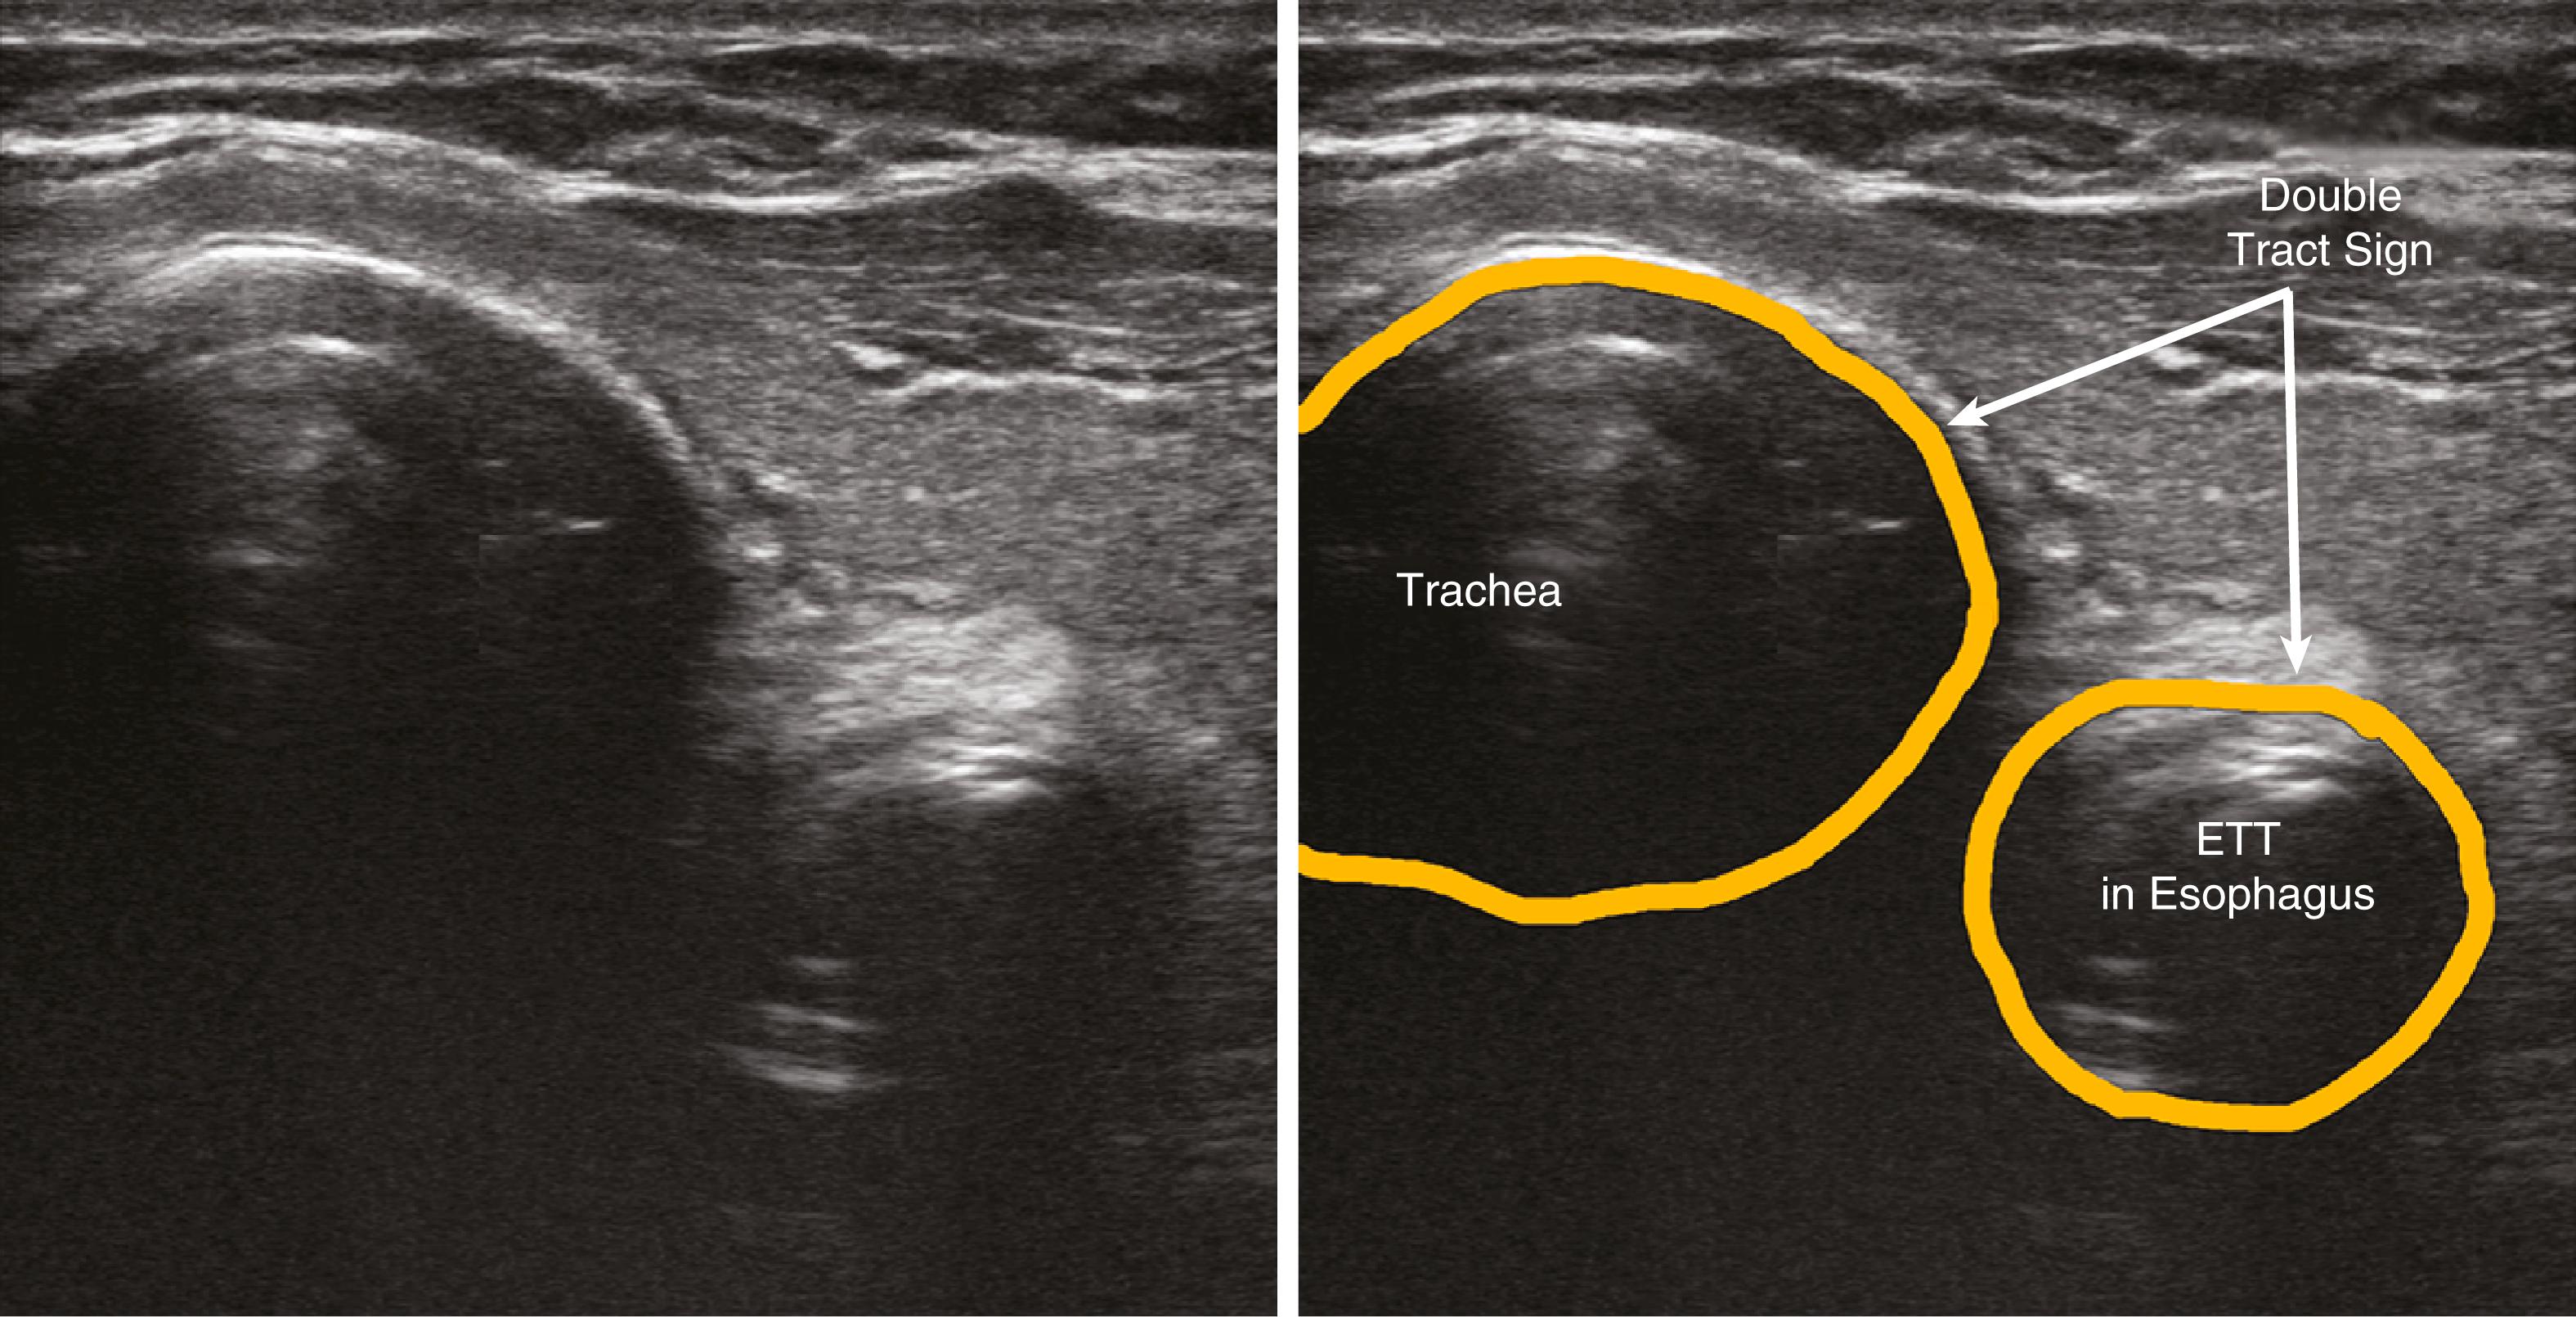 Figure 32.14, Transverse scan of the neck showing endotracheal tube in the esophagus. The double tract sign. ETT , Endotracheal tube.